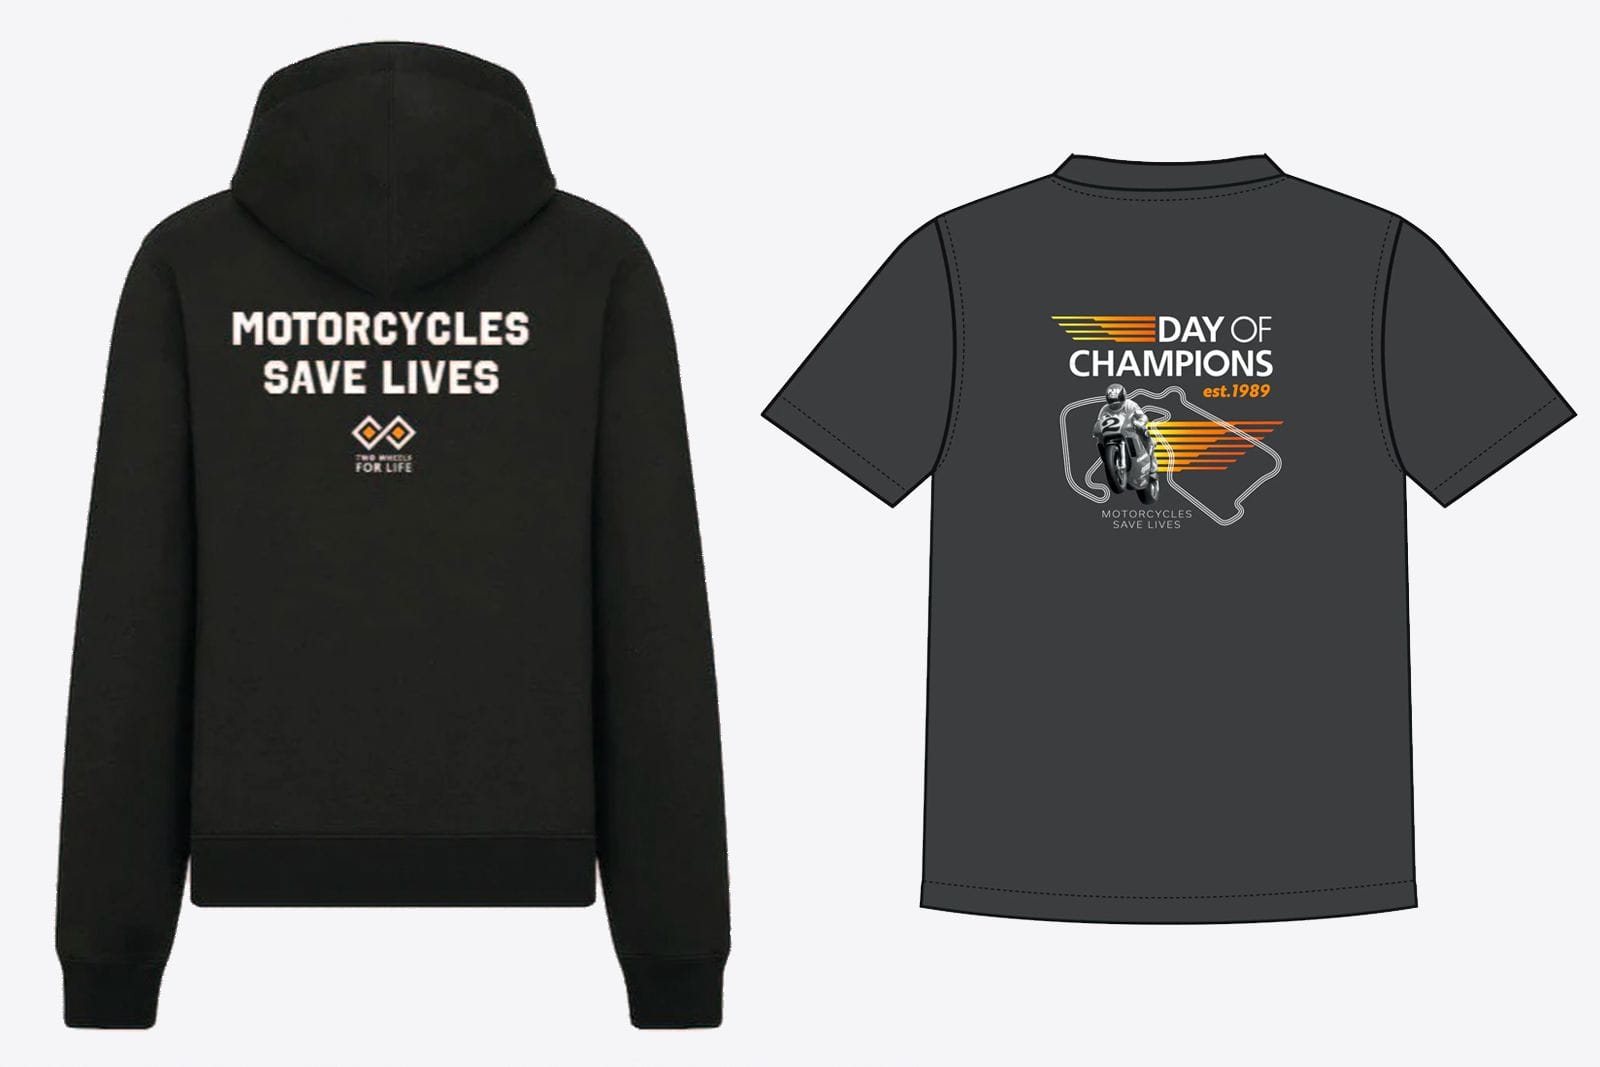 Shop our brand new hoodies and our classic tees.